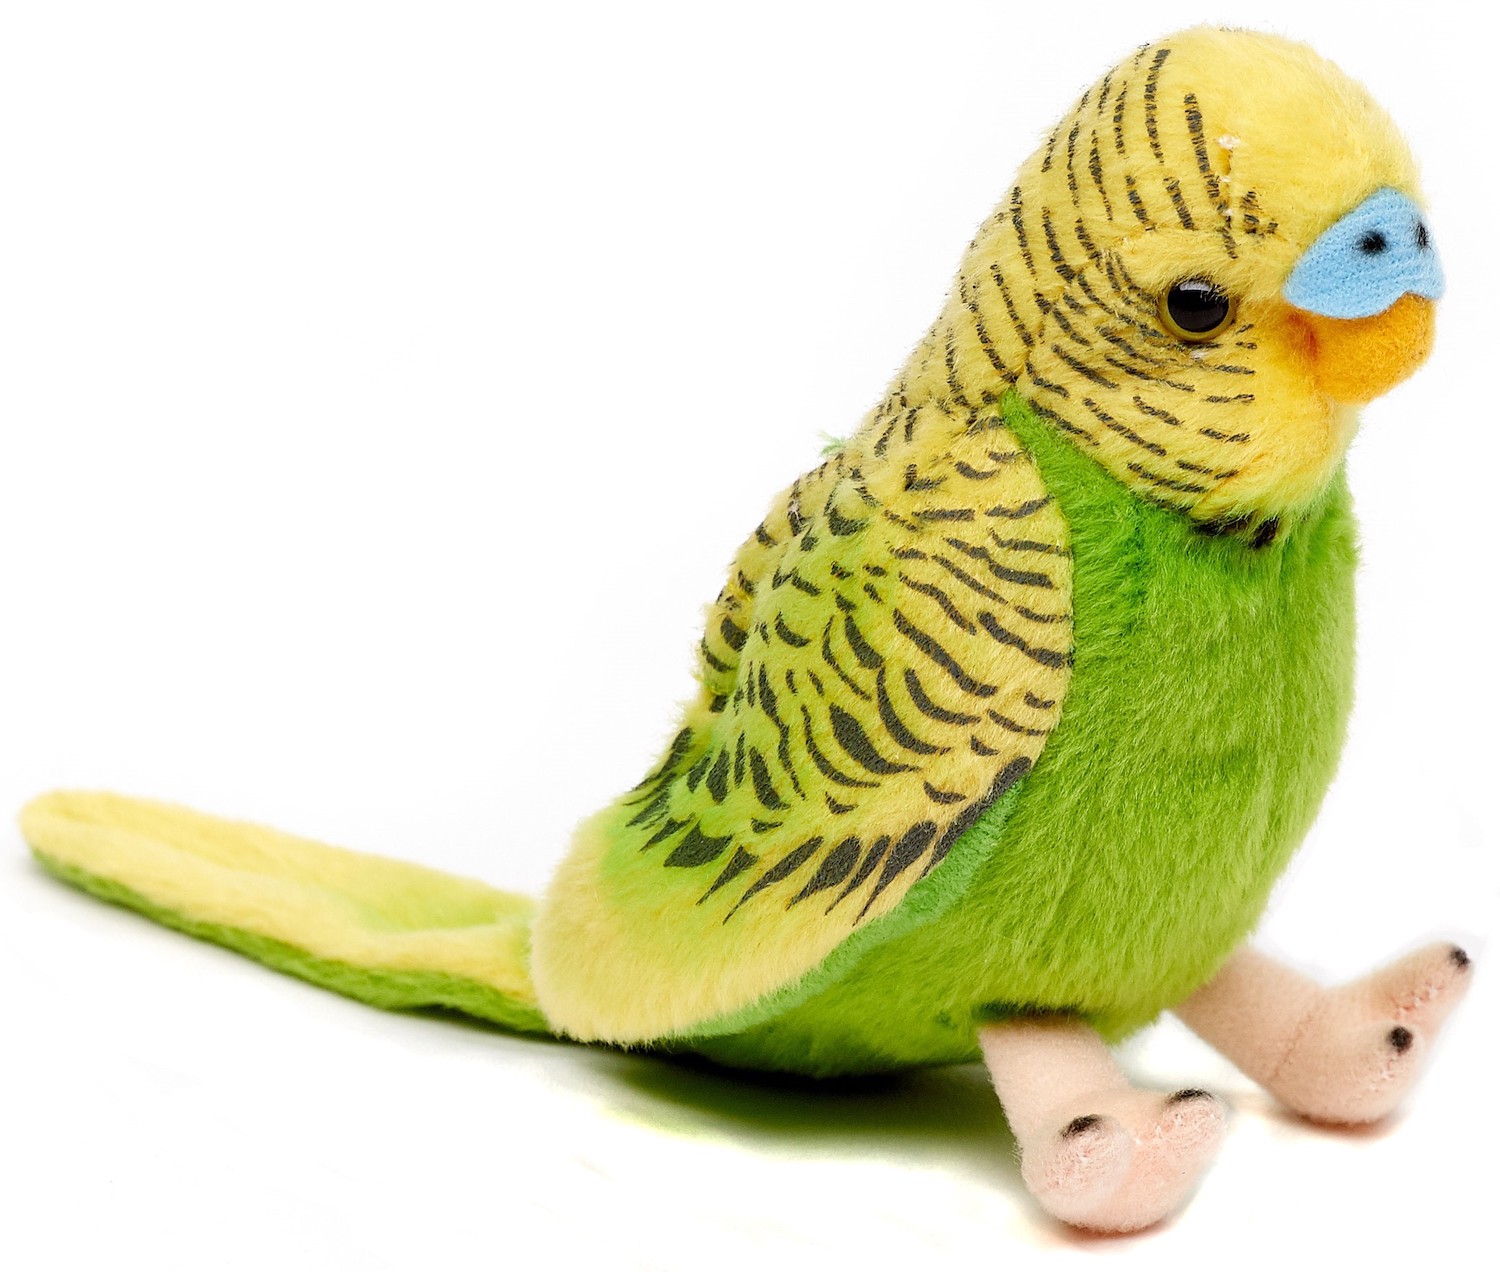 Uni-Toys - budgie (green) with chirping voice - 12 cm (height) - bird - plush toy, cuddly toy 